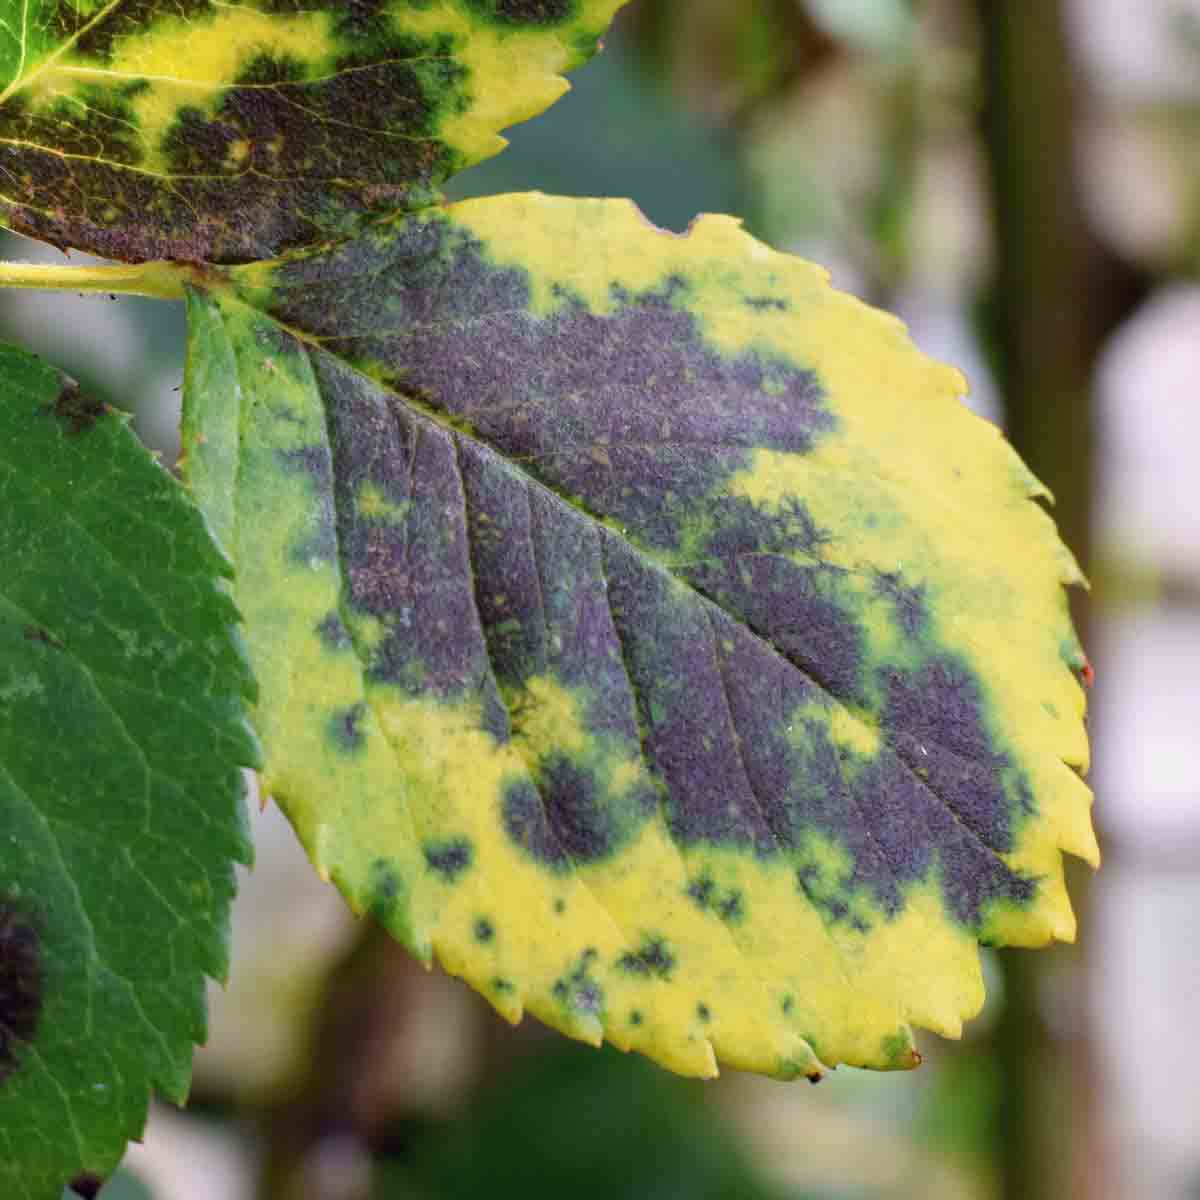 Causes of Plant Disease